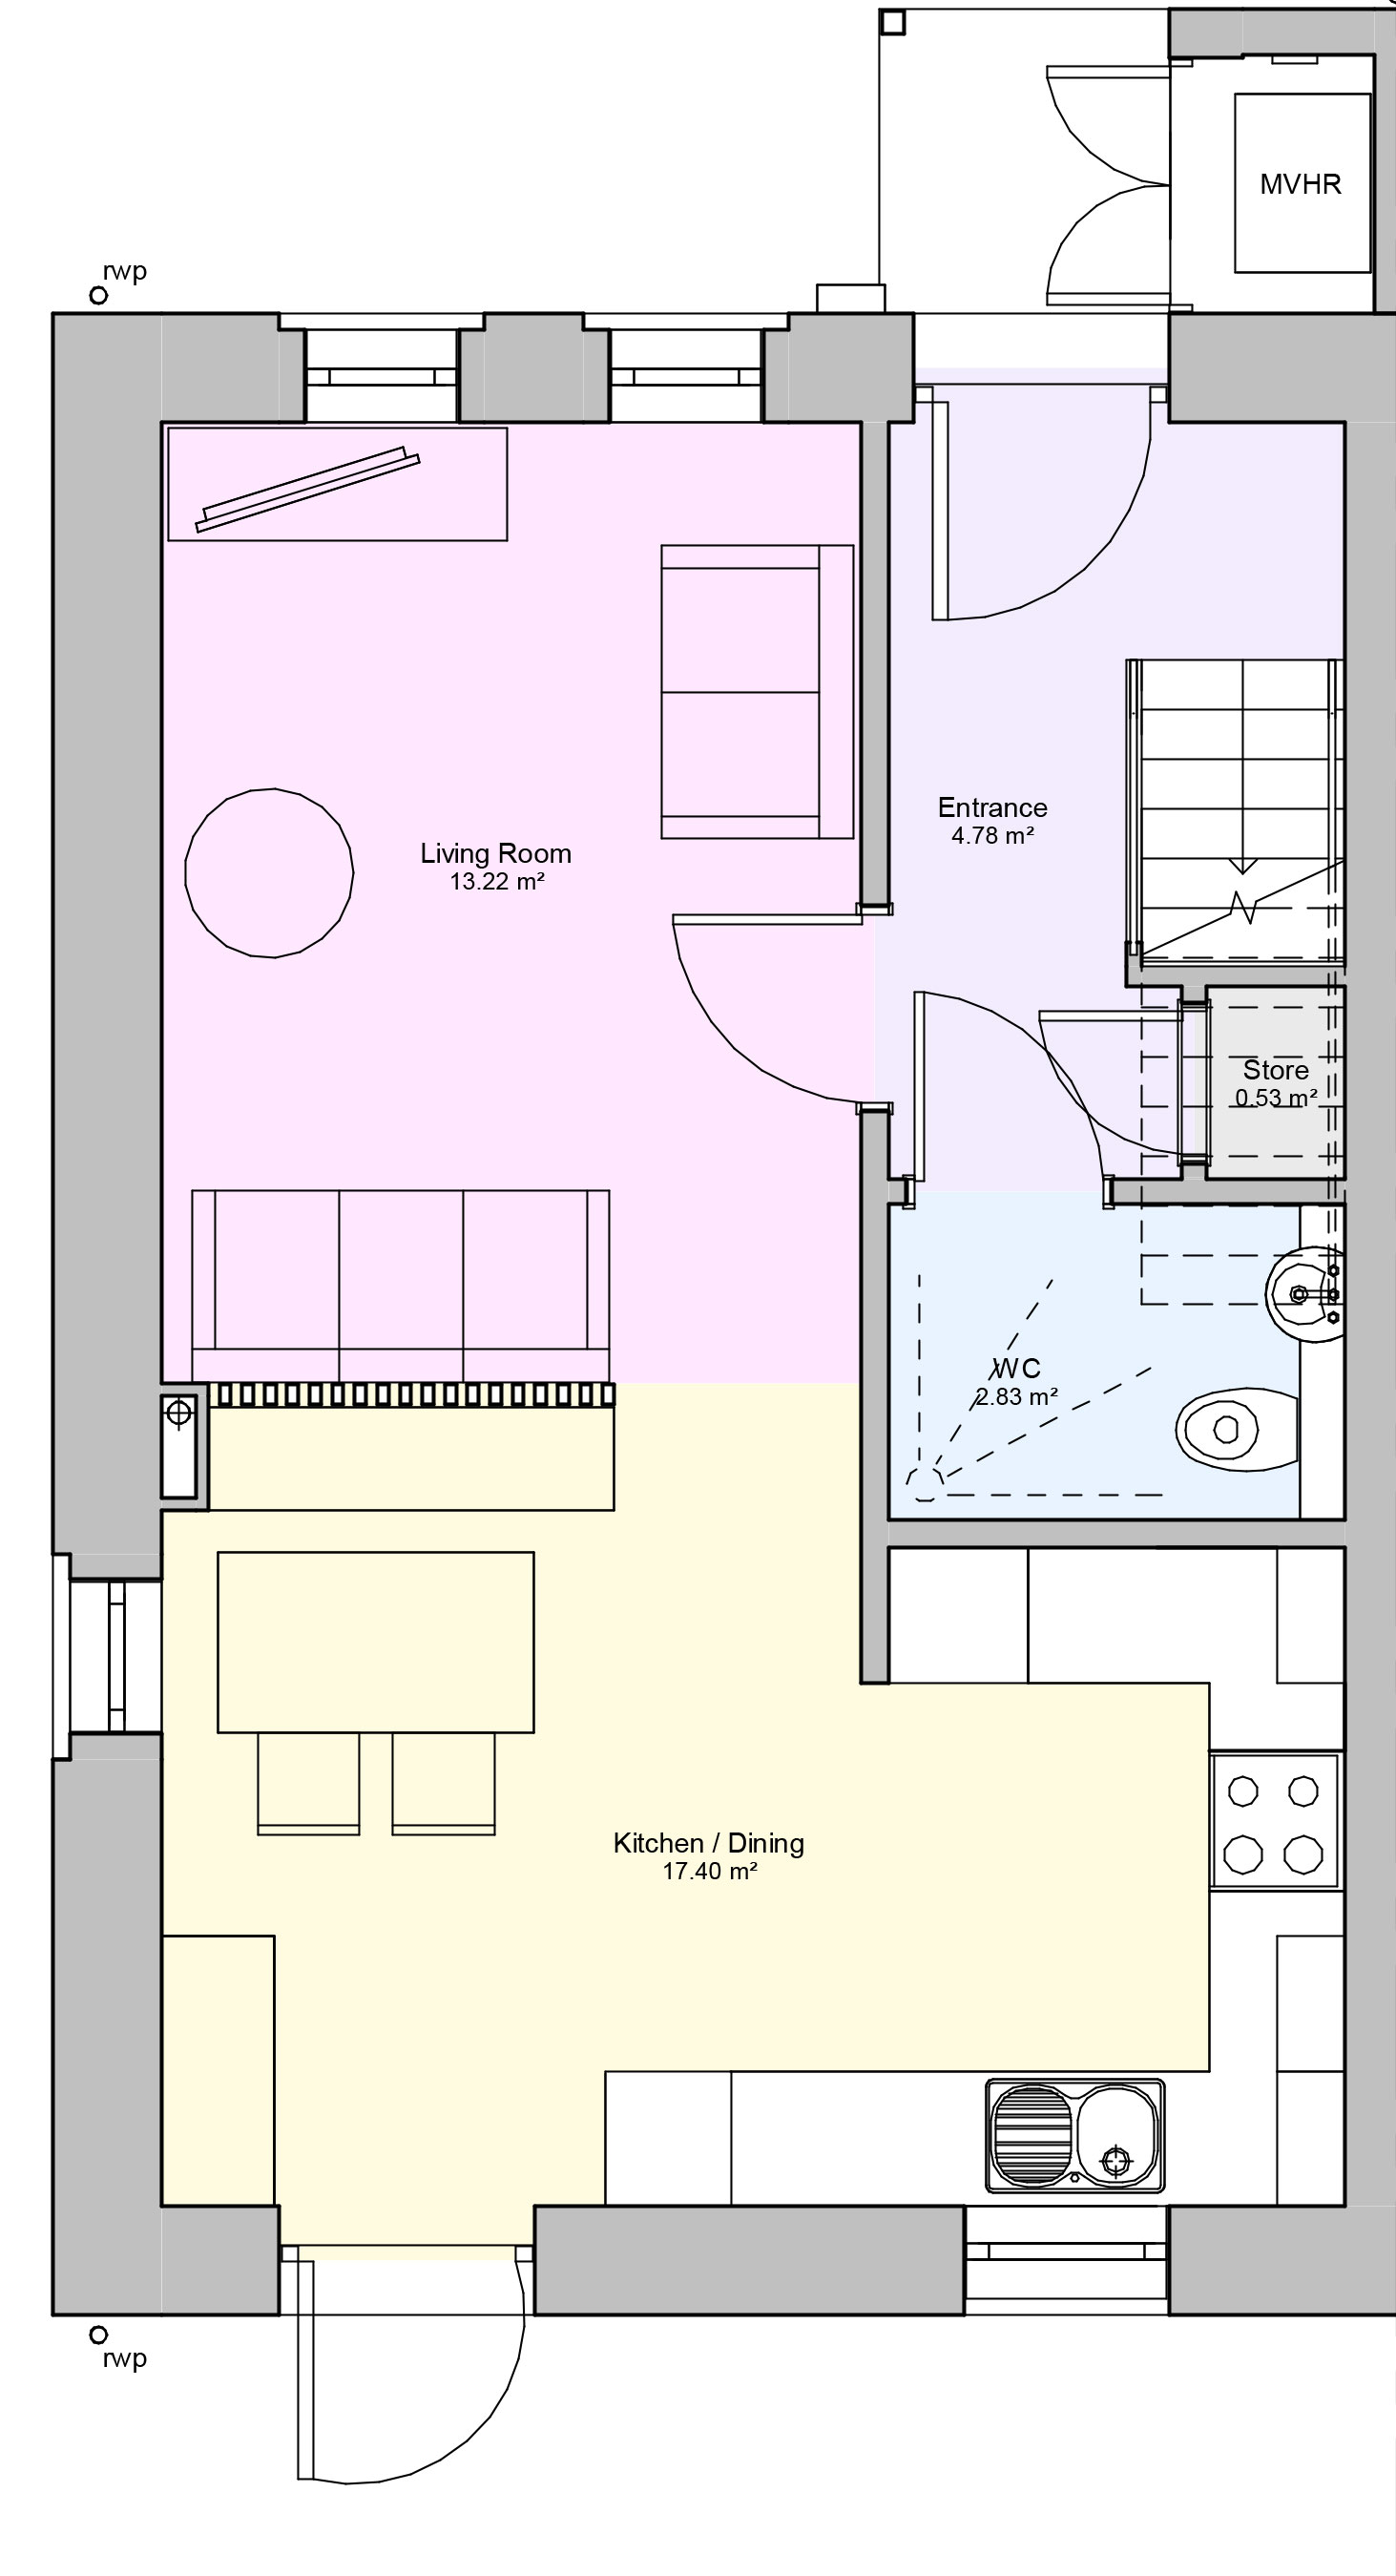 Two storey, floorplan of house type 1, two bedrooms with kitchen/diner and living room.